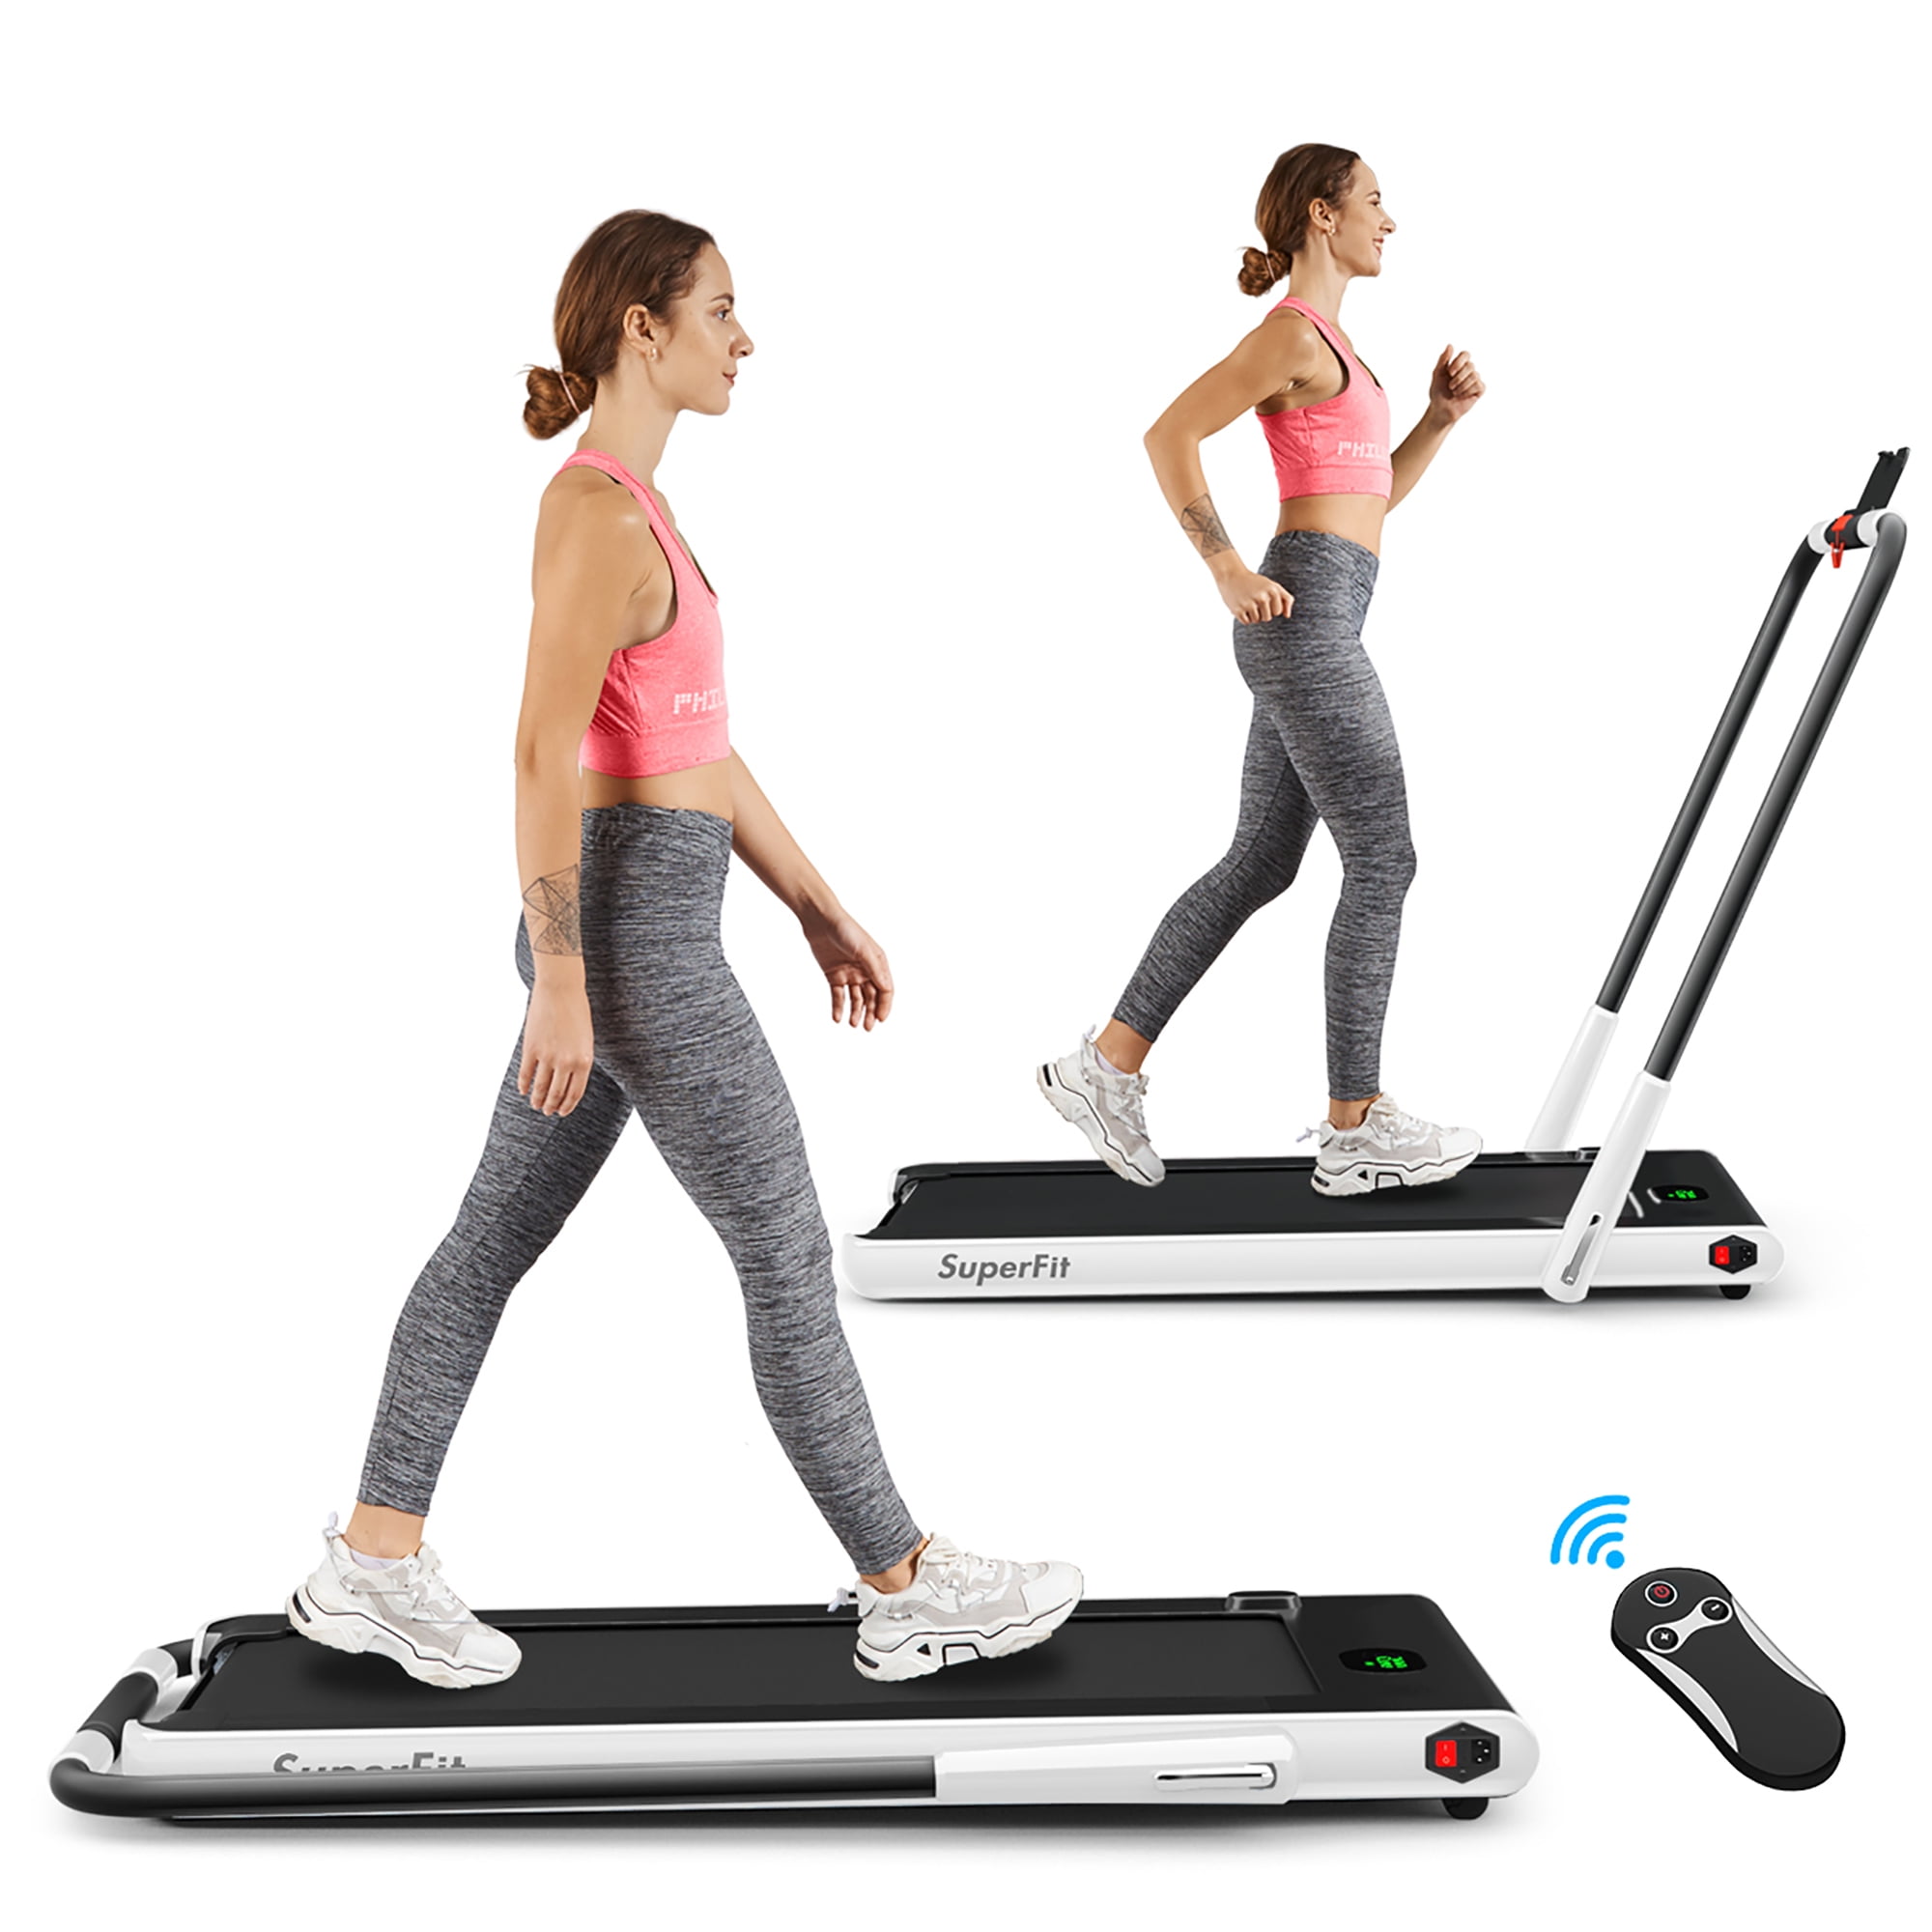 ANCHEER Under Desk Treadmill 2.25HP,Indoor Folding Running Machine for Home Exercise,2 in1 Electric Exercise Treadmillwith Remote Control&Digital Monitor&Bluetooth Speaker. 